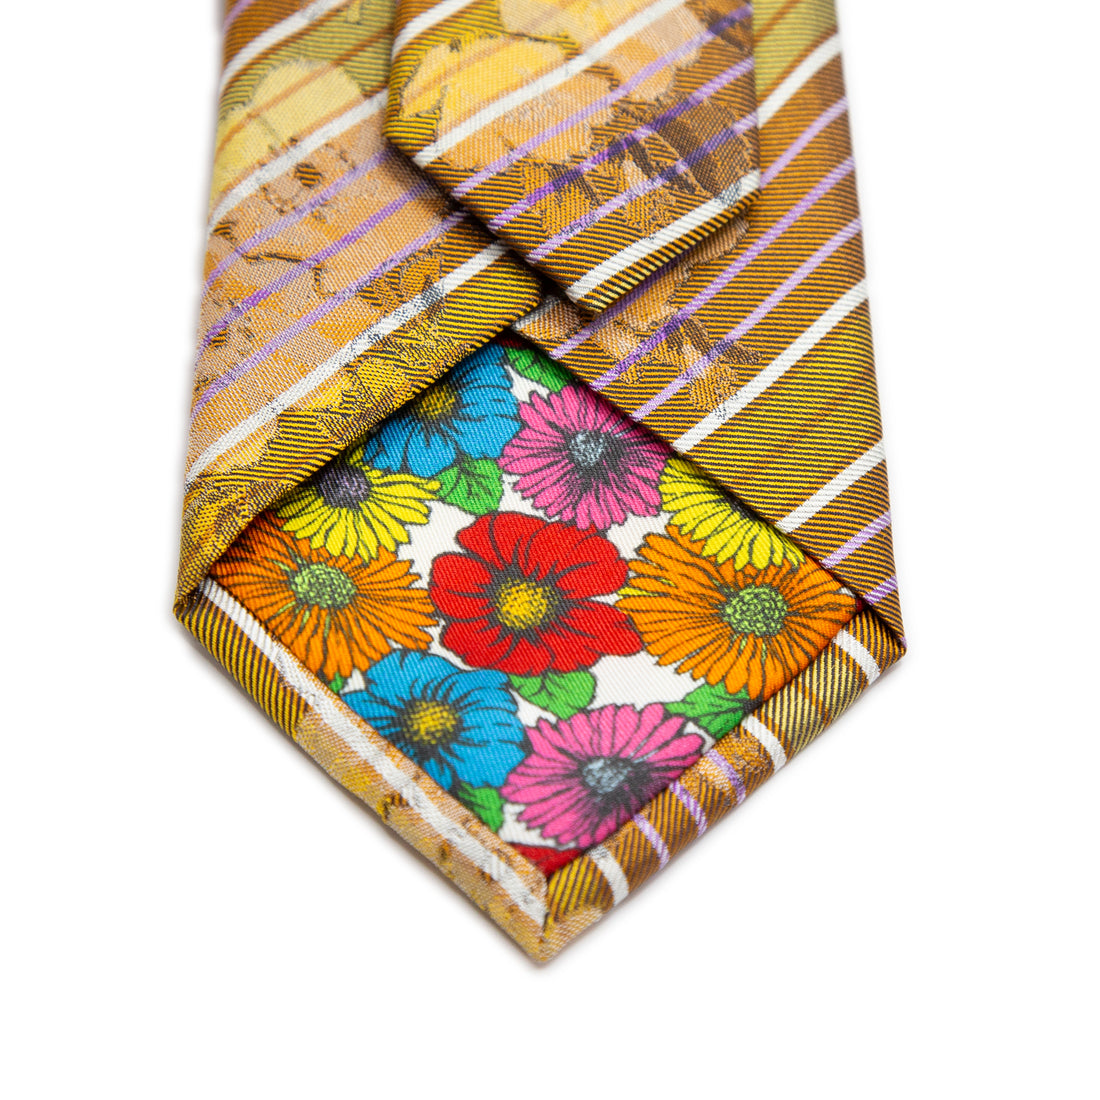 JACQUES MONCLEEF Mens Italian Striped Floral Silk Neck Tie in Gold and Orange